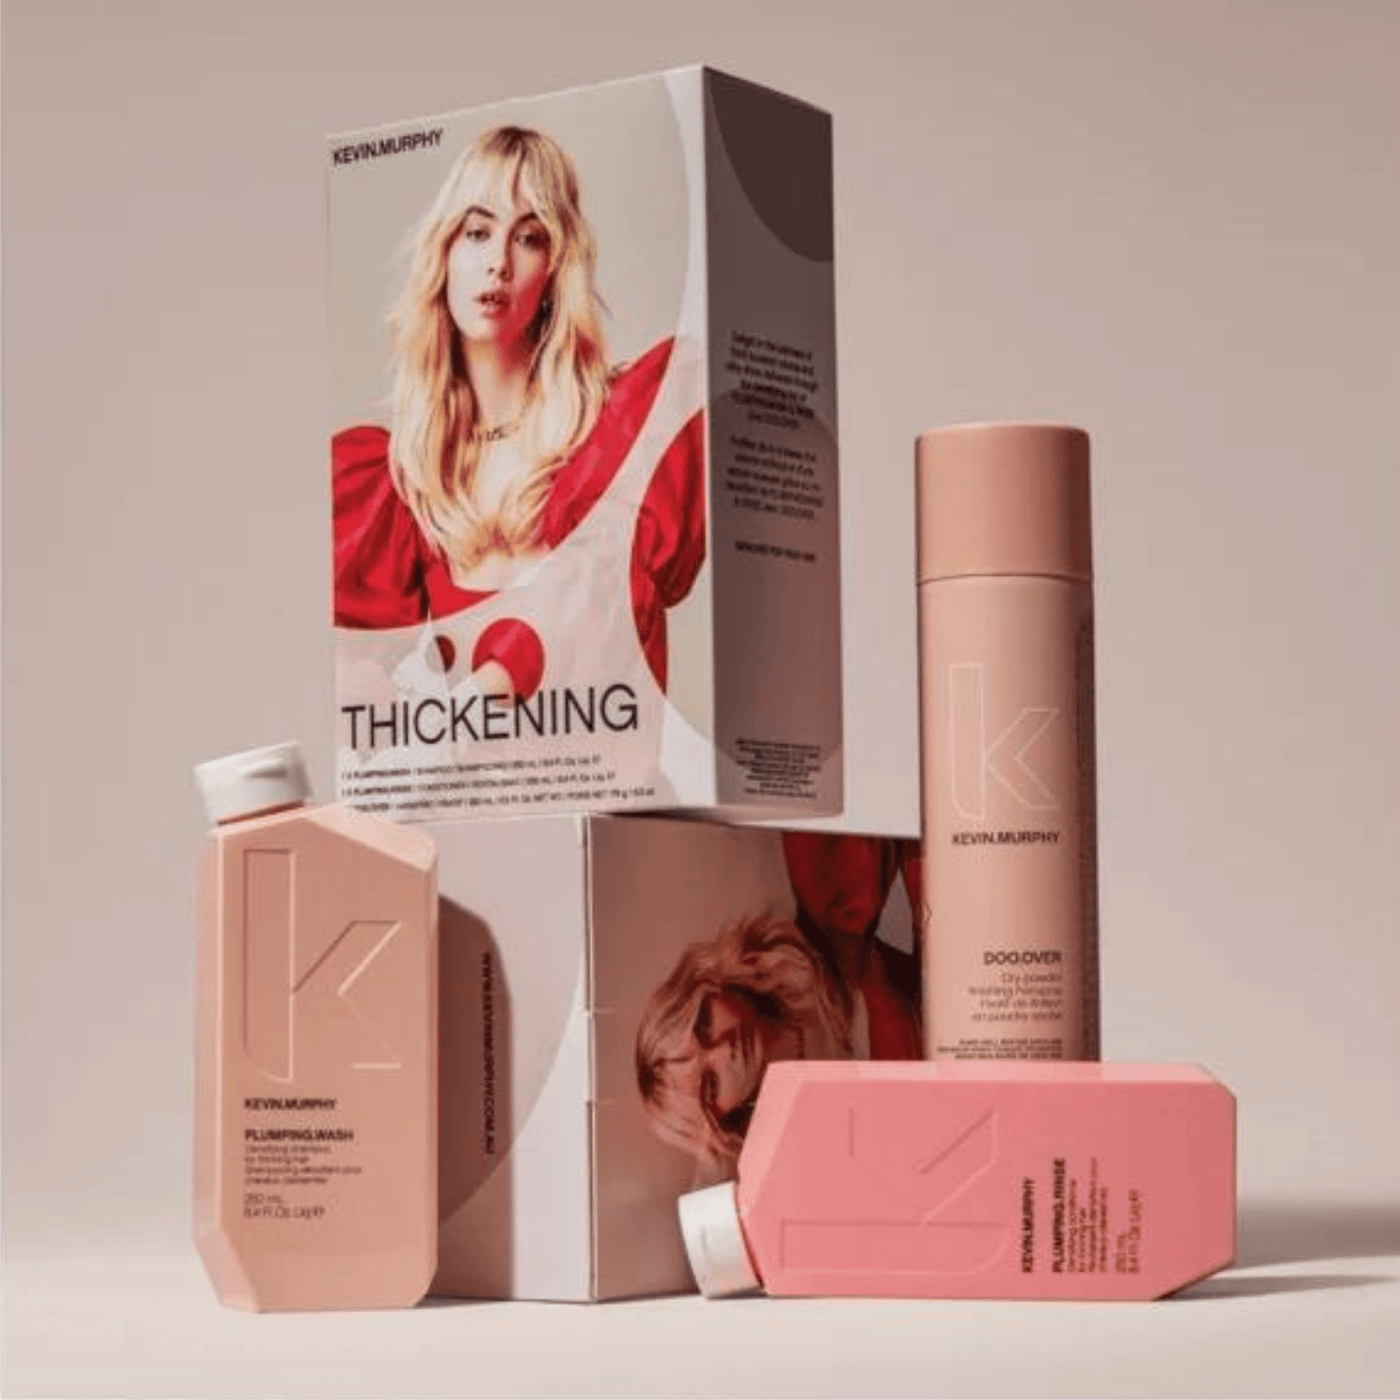 Kevin Murphy Haircare Packs Kevin Murphy Thickening Plumping Pack